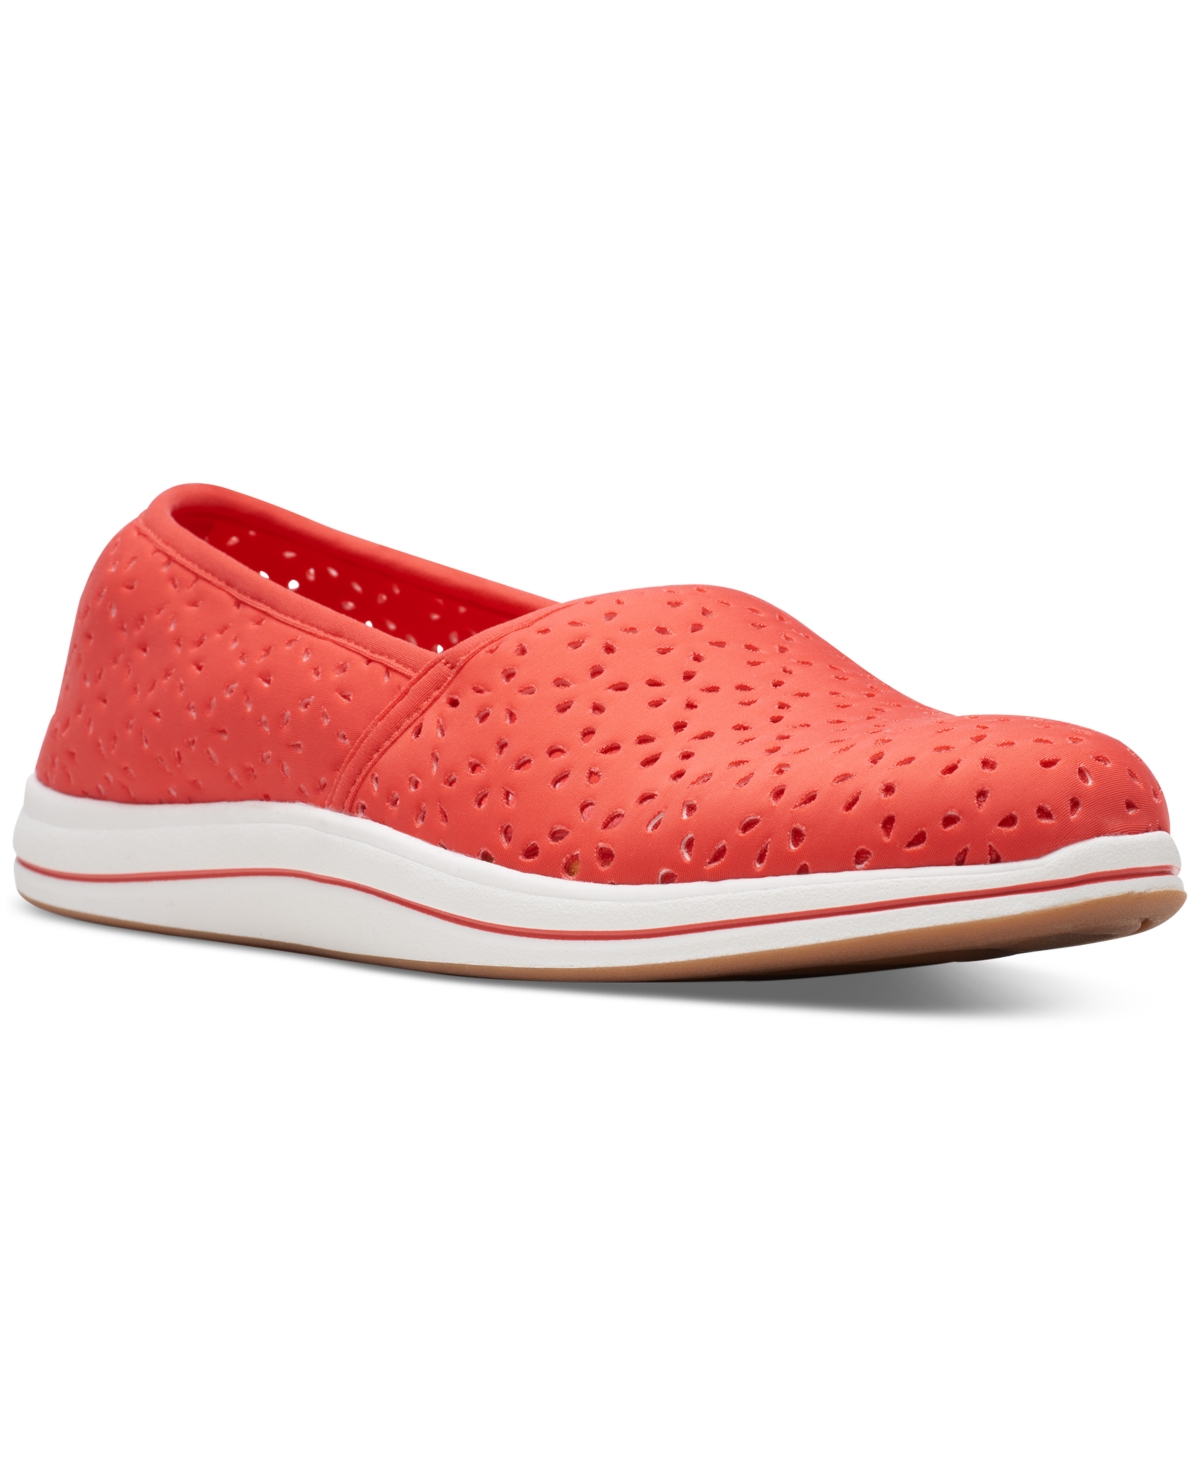 Clarks Women's Cloudsteppers Breeze Emily Perforated Loafer Flats Women ...